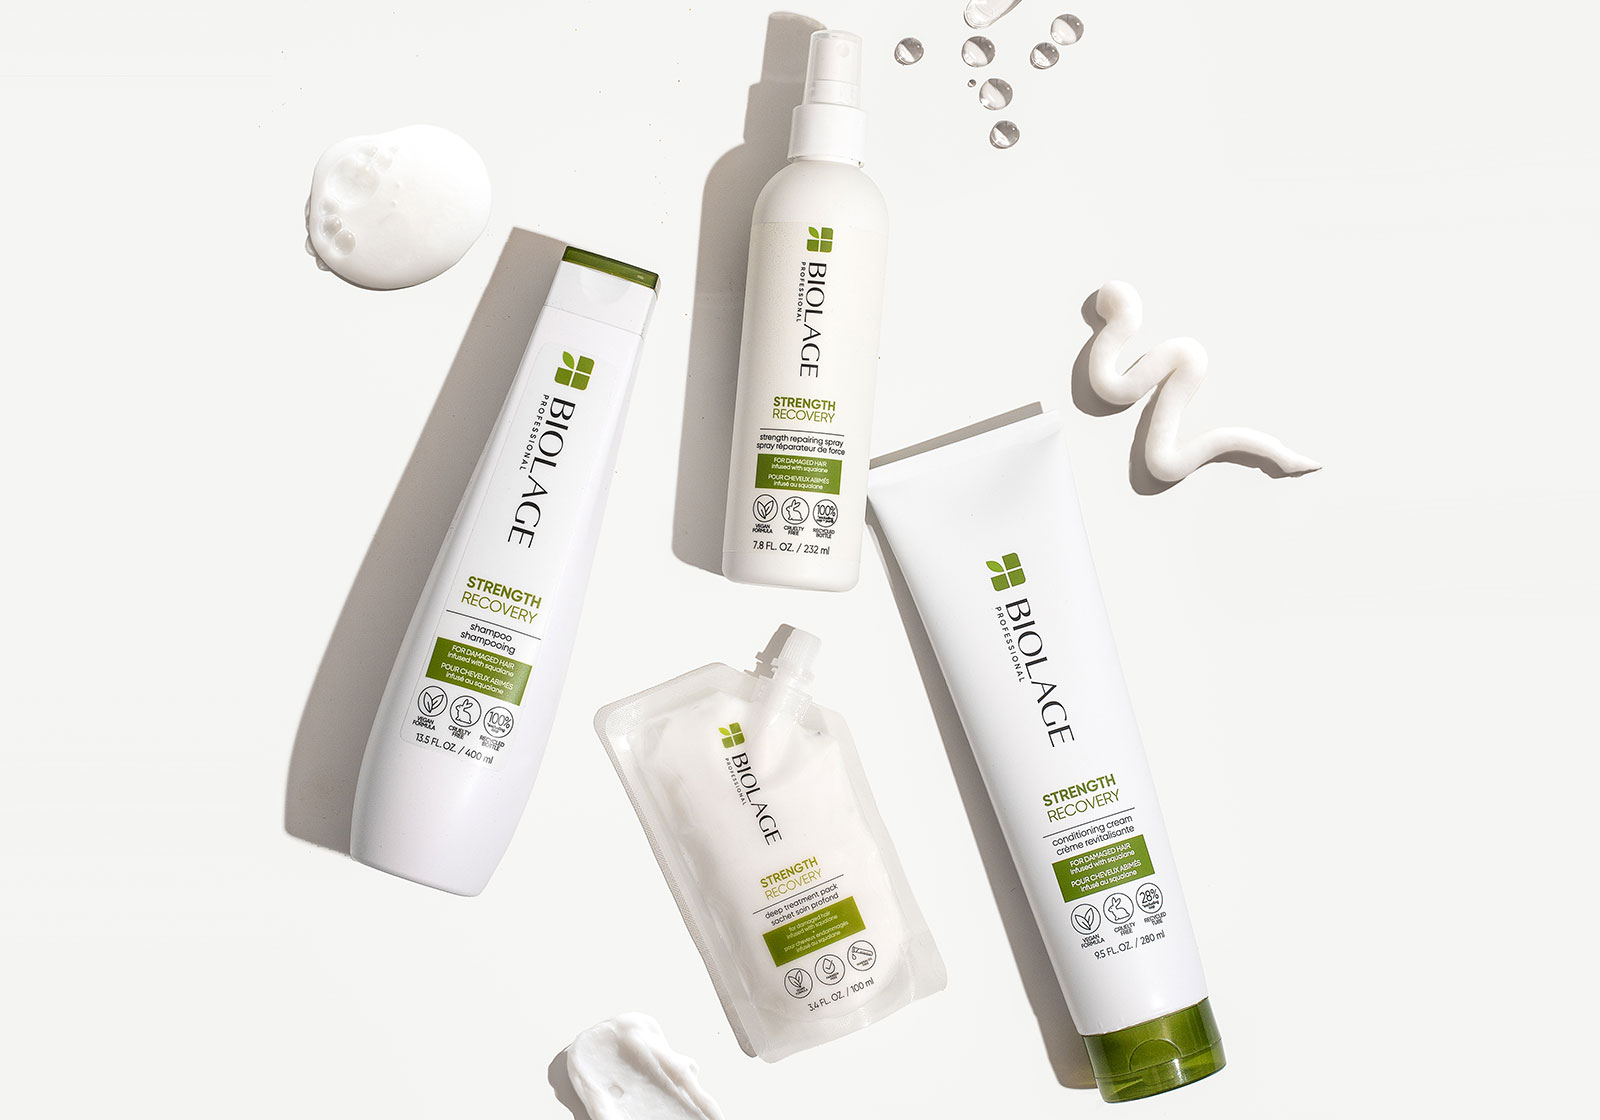 Biolage Strength Recovery Full Range Flatlay with Textures 